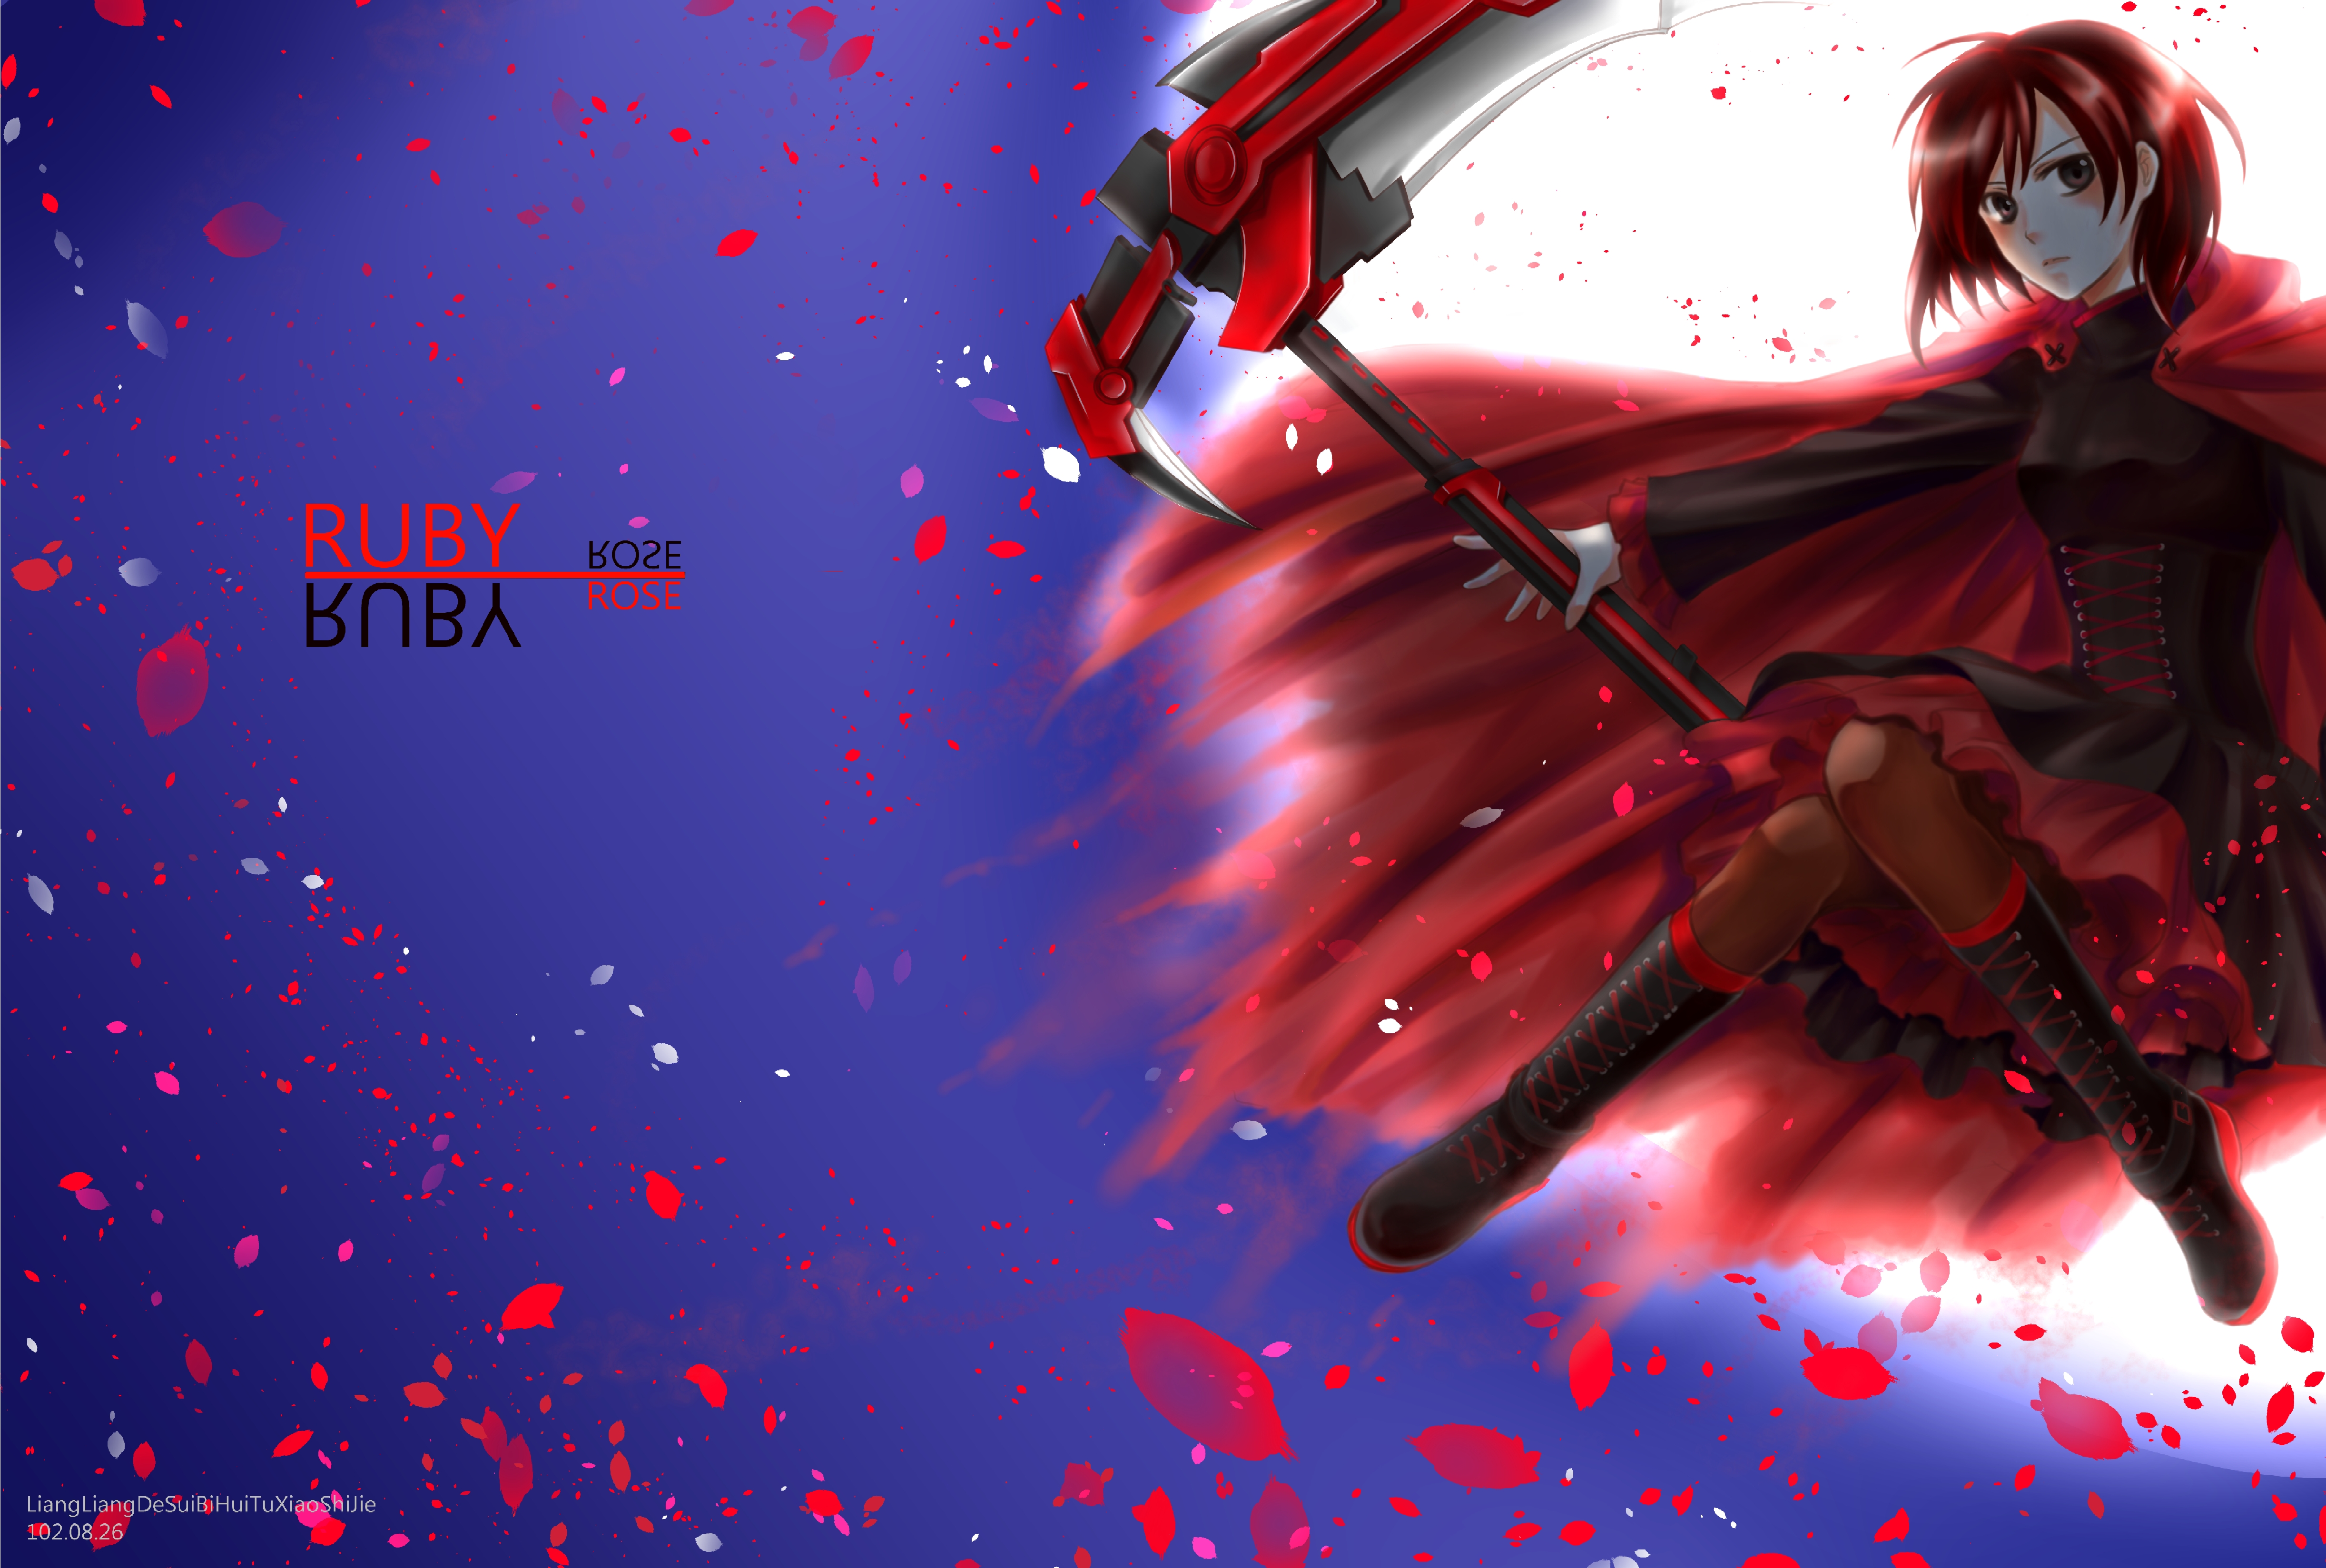 Free Download Rwby Ruby Rose Hd Wallpaper Background 48x3296 For Your Desktop Mobile Tablet Explore 50 Rwby Iphone 5 Wallpaper Iphone 5s Wallpaper Rwby Wallpaper Download Rwby Blake Wallpaper